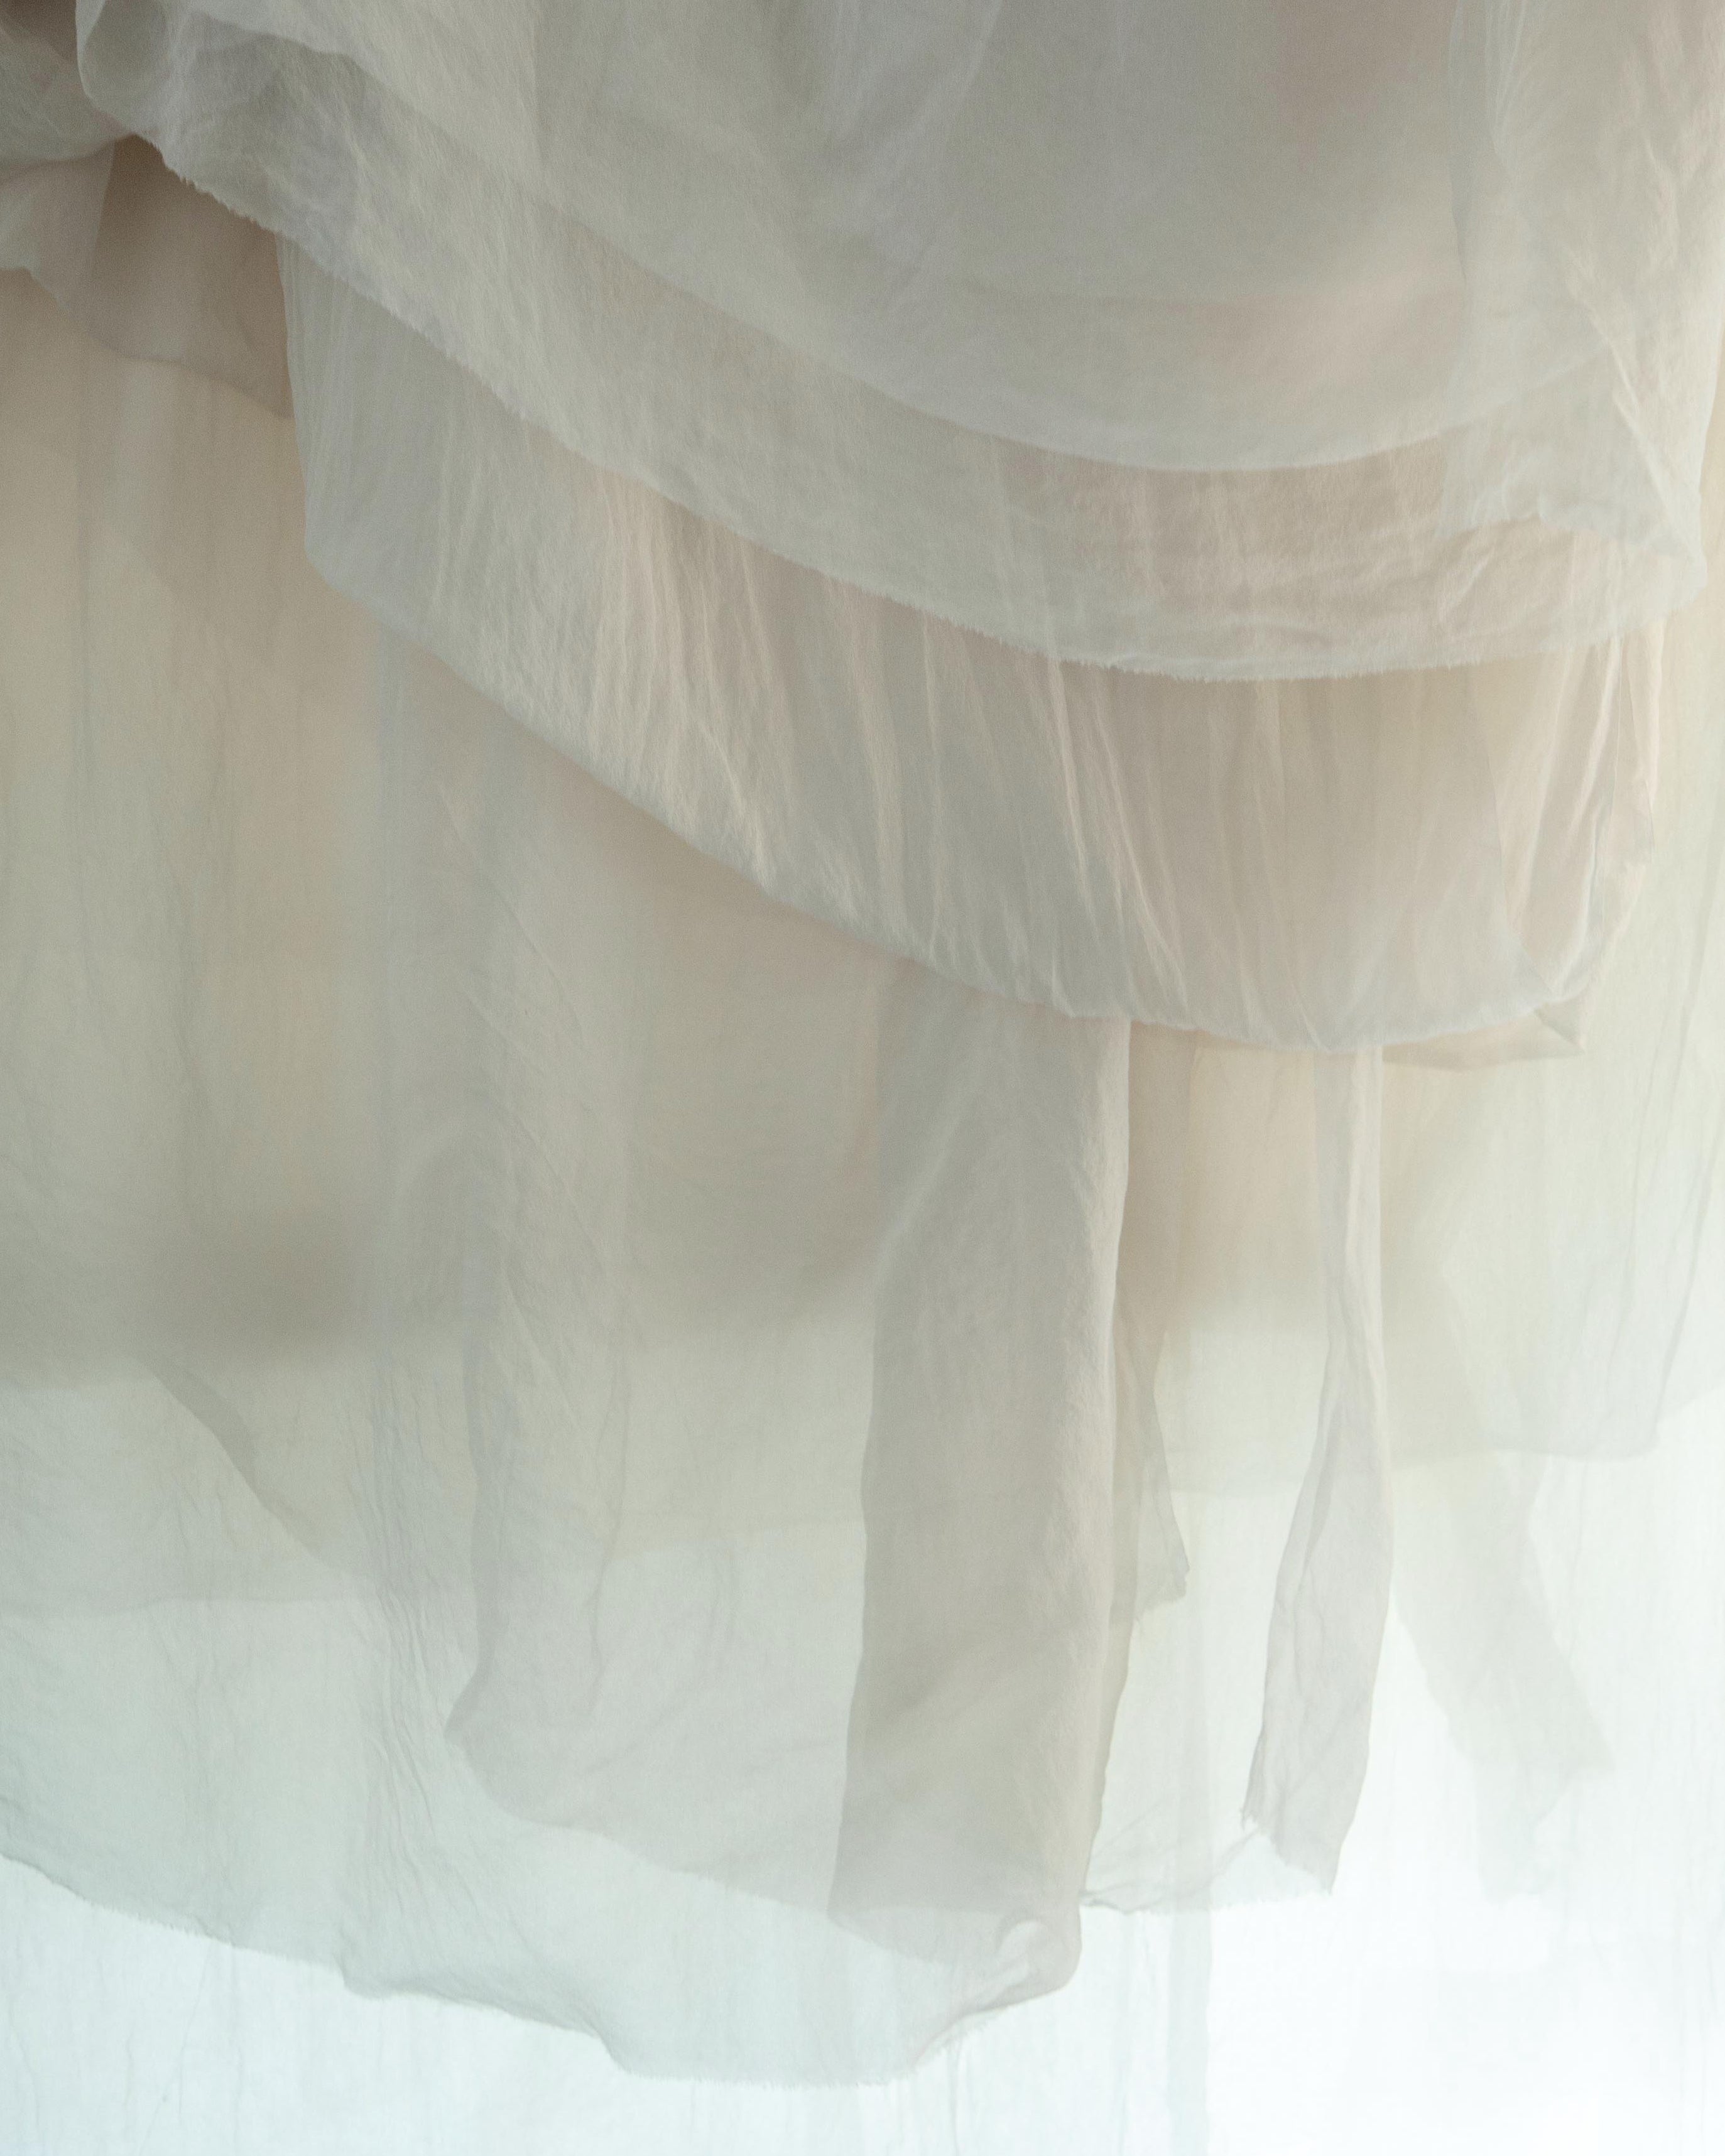 sheer silk hanging in layers with light shining through